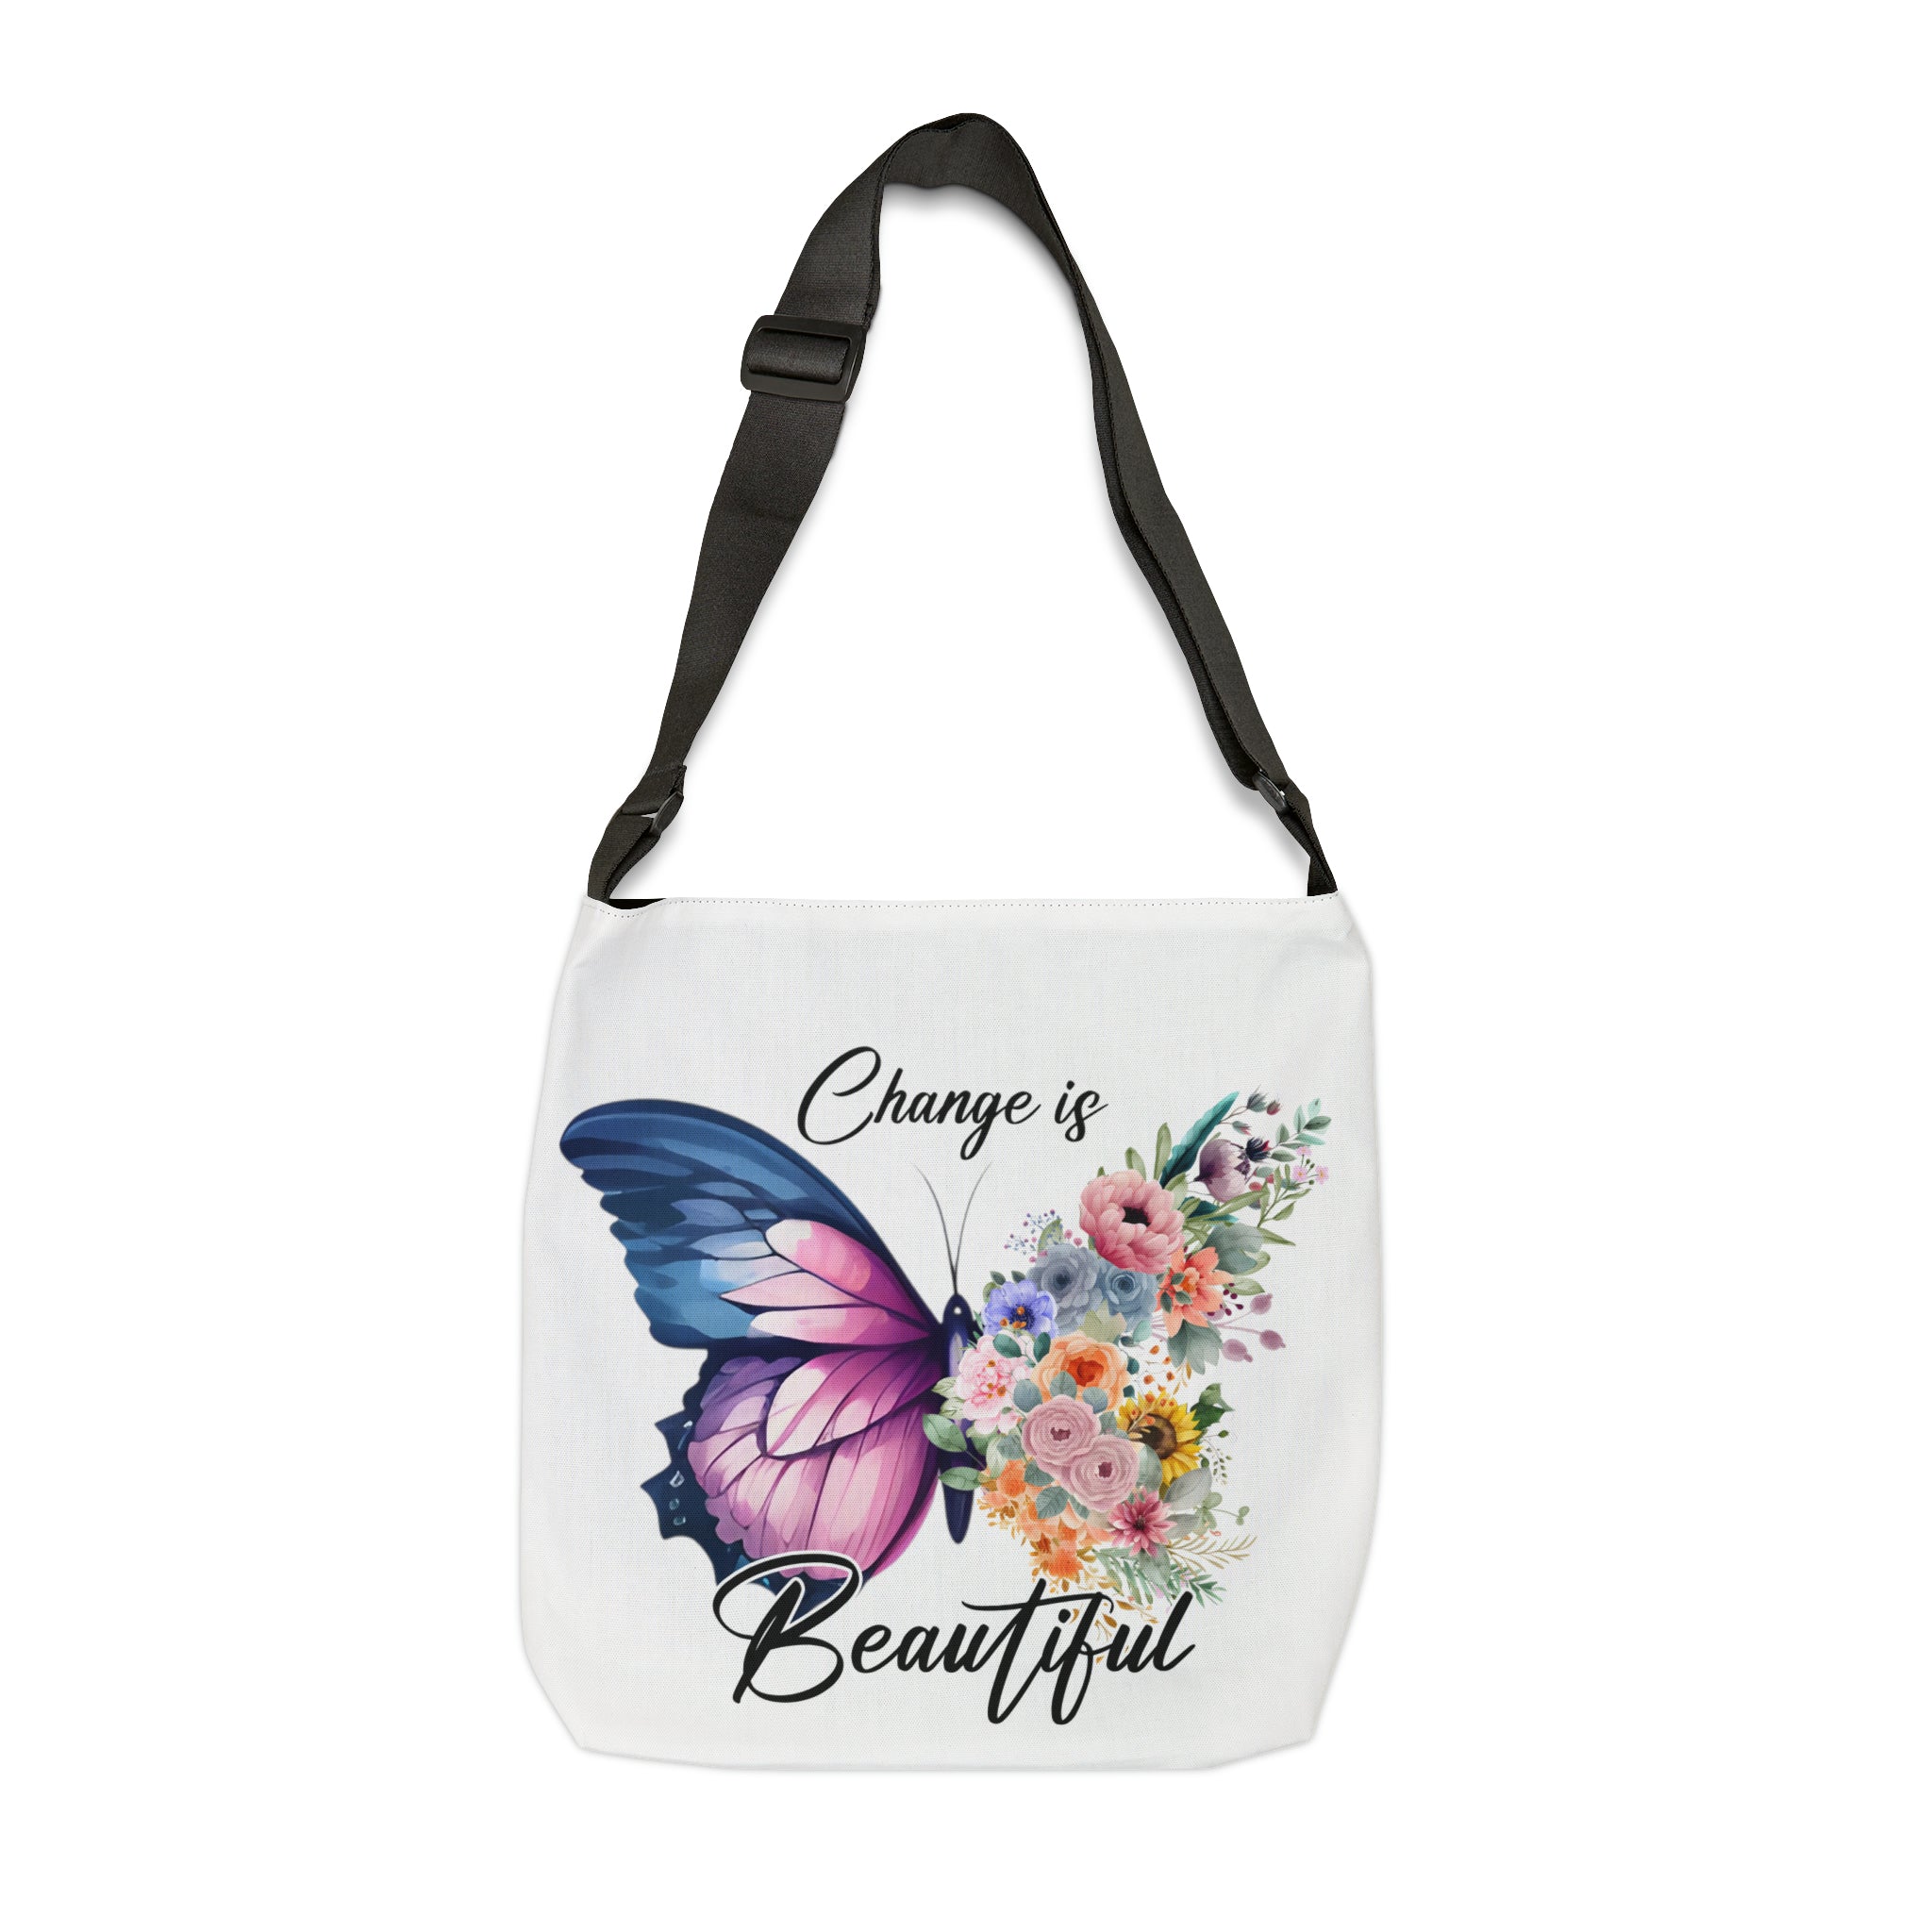 Butterfly Print "Change is Beautiful" Adjustable Tote Bag